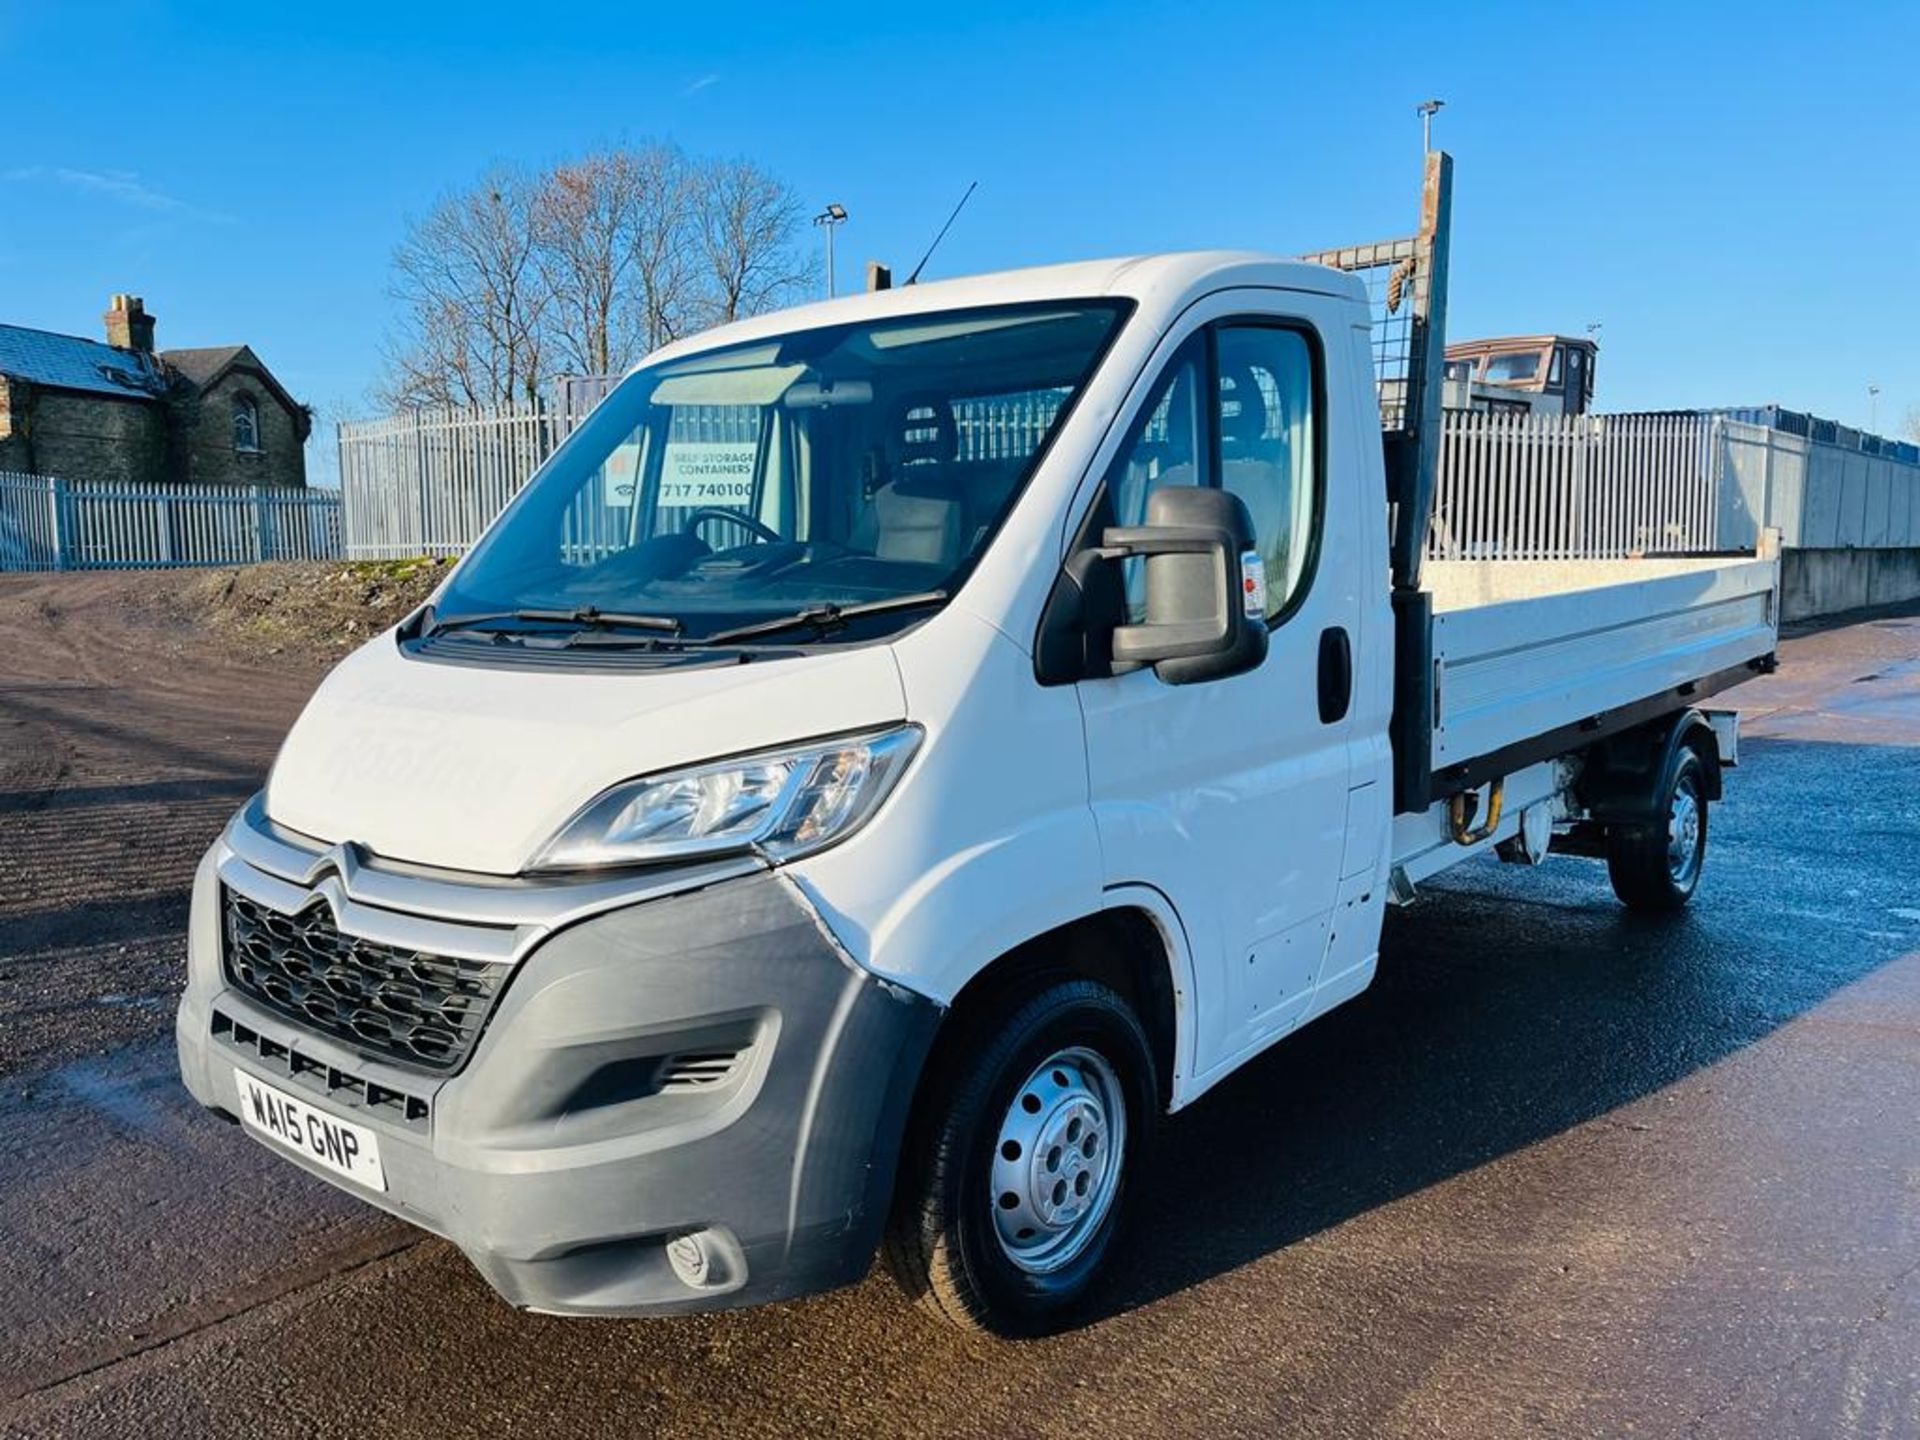 ** ON SALE ** Citroen Relay 35 2.2 HDI 130 LWB Alloy Tipper 2015 '15 Reg' Only 105,090 Miles - Image 5 of 31